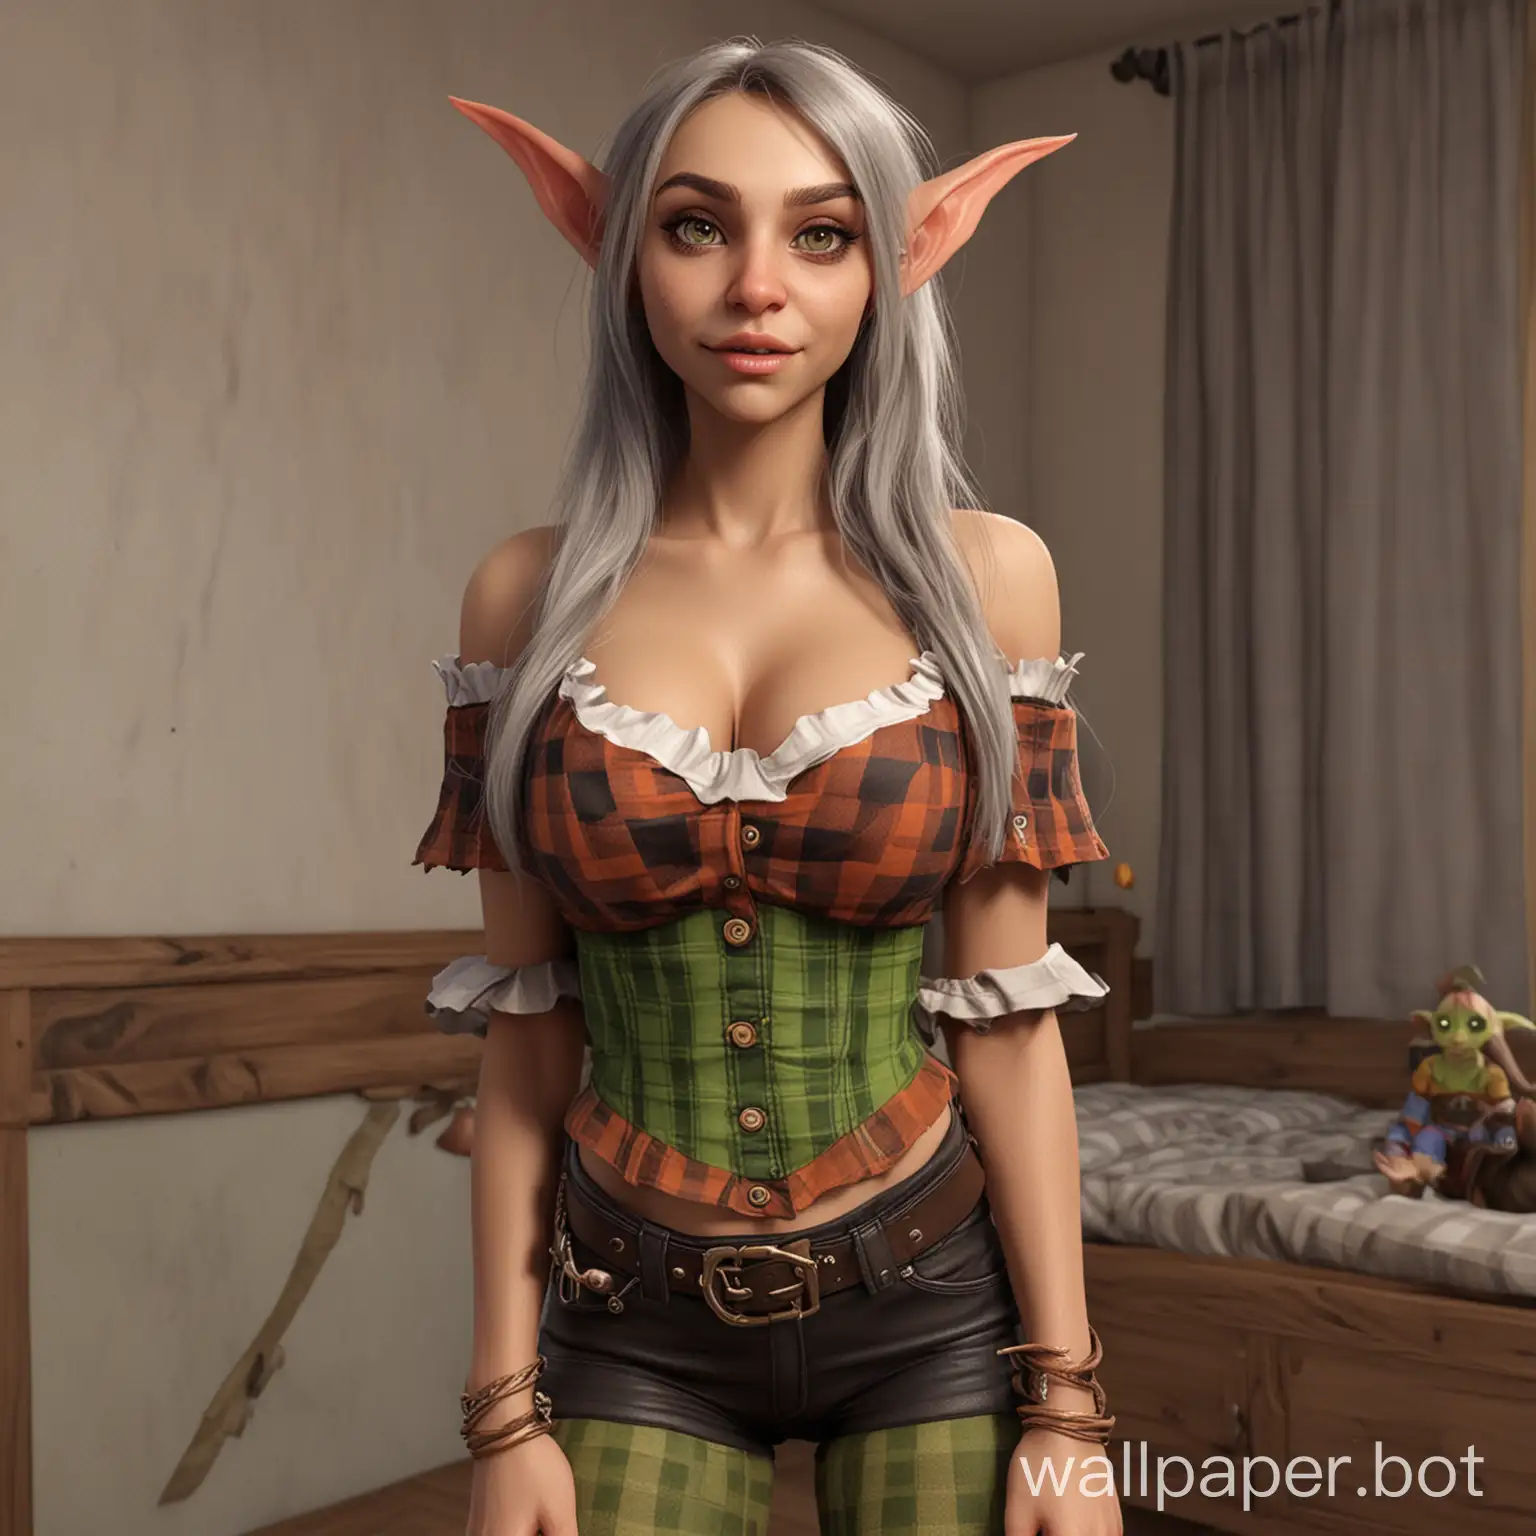 (world of warcraft, in a realistic style,)
(Girl 25 years old, hybrid: elf-goblin)
(Build: medium weight, flesh-colored skin, large mouth, full lips, big nose)
 (Female more big breasts 4 times)
(Clothing: In a checkered shirt, in leggings)
(Location: In an apartment)
(Action: Selfie)